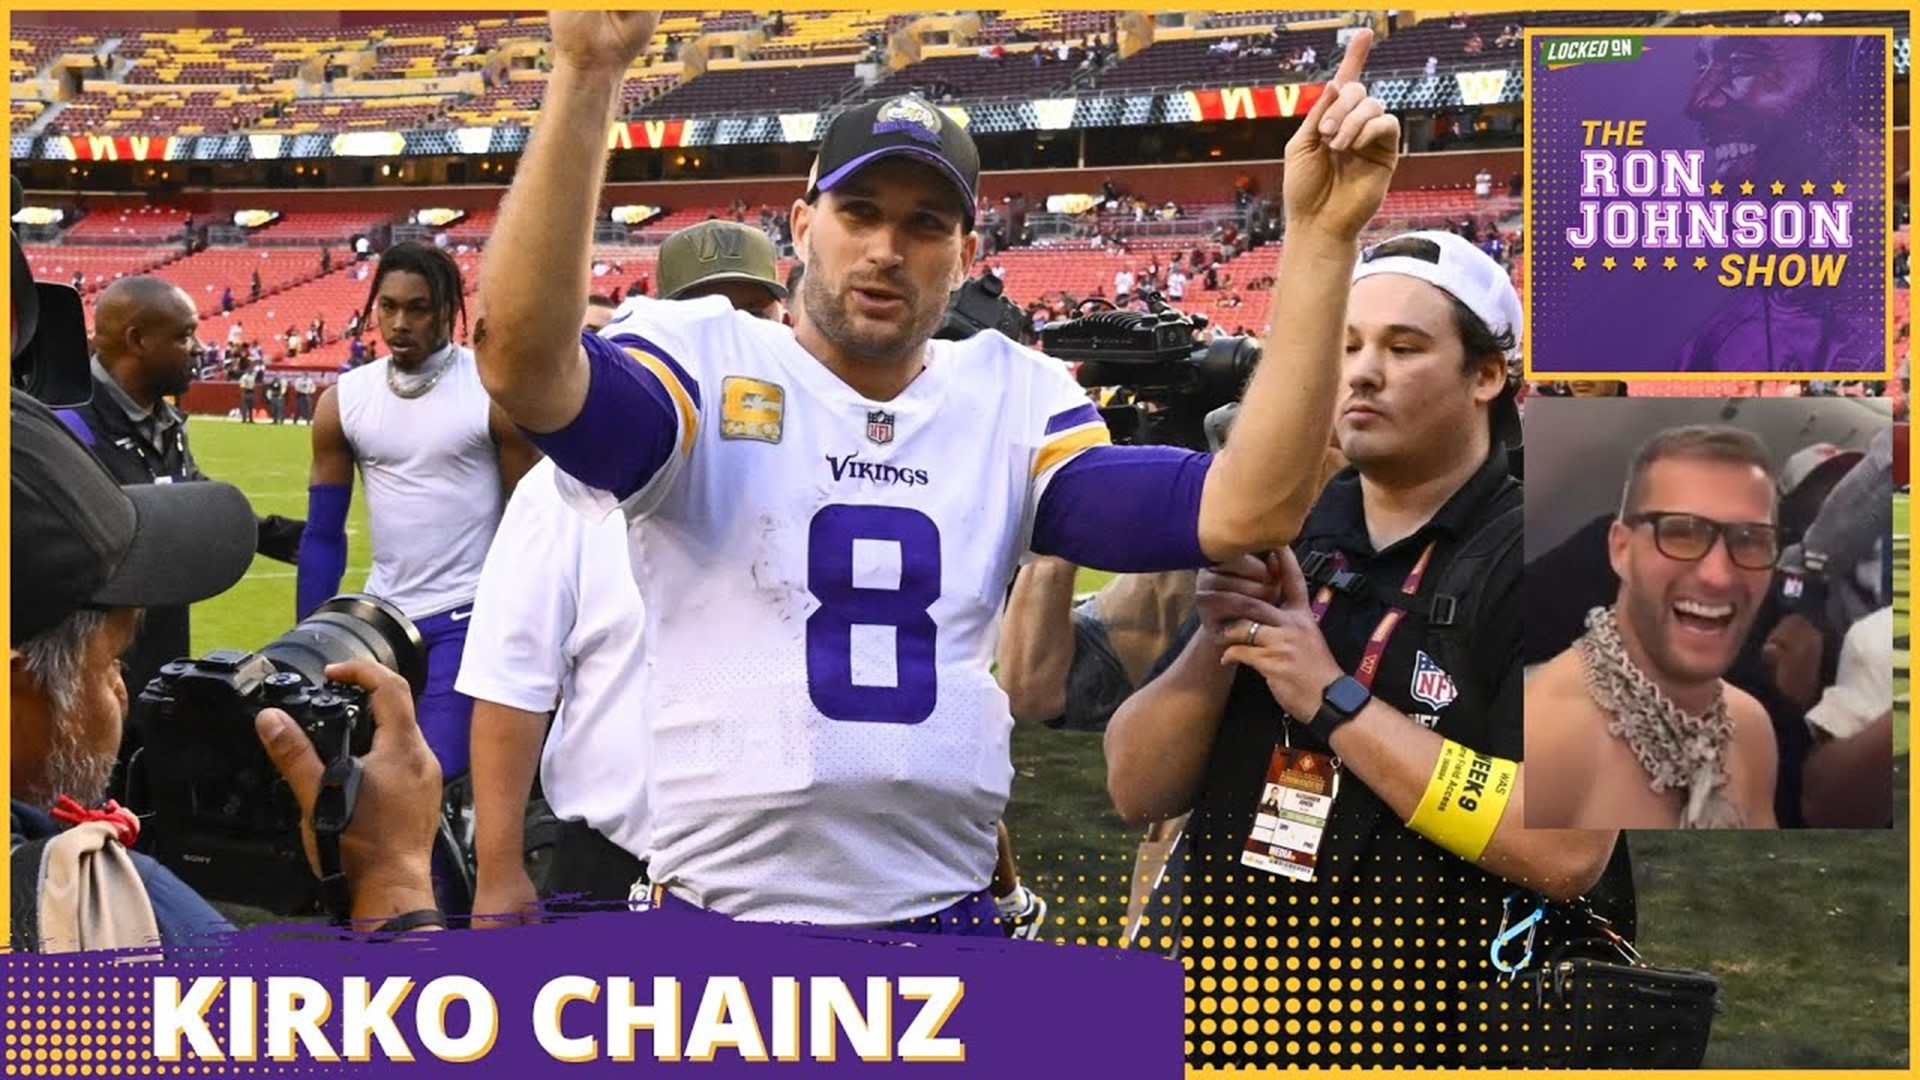 Kirk "Chainz" Cousins Propelled the Minnesota Vikings to ANOTHER Comeback Win | The Ron Johnson Show